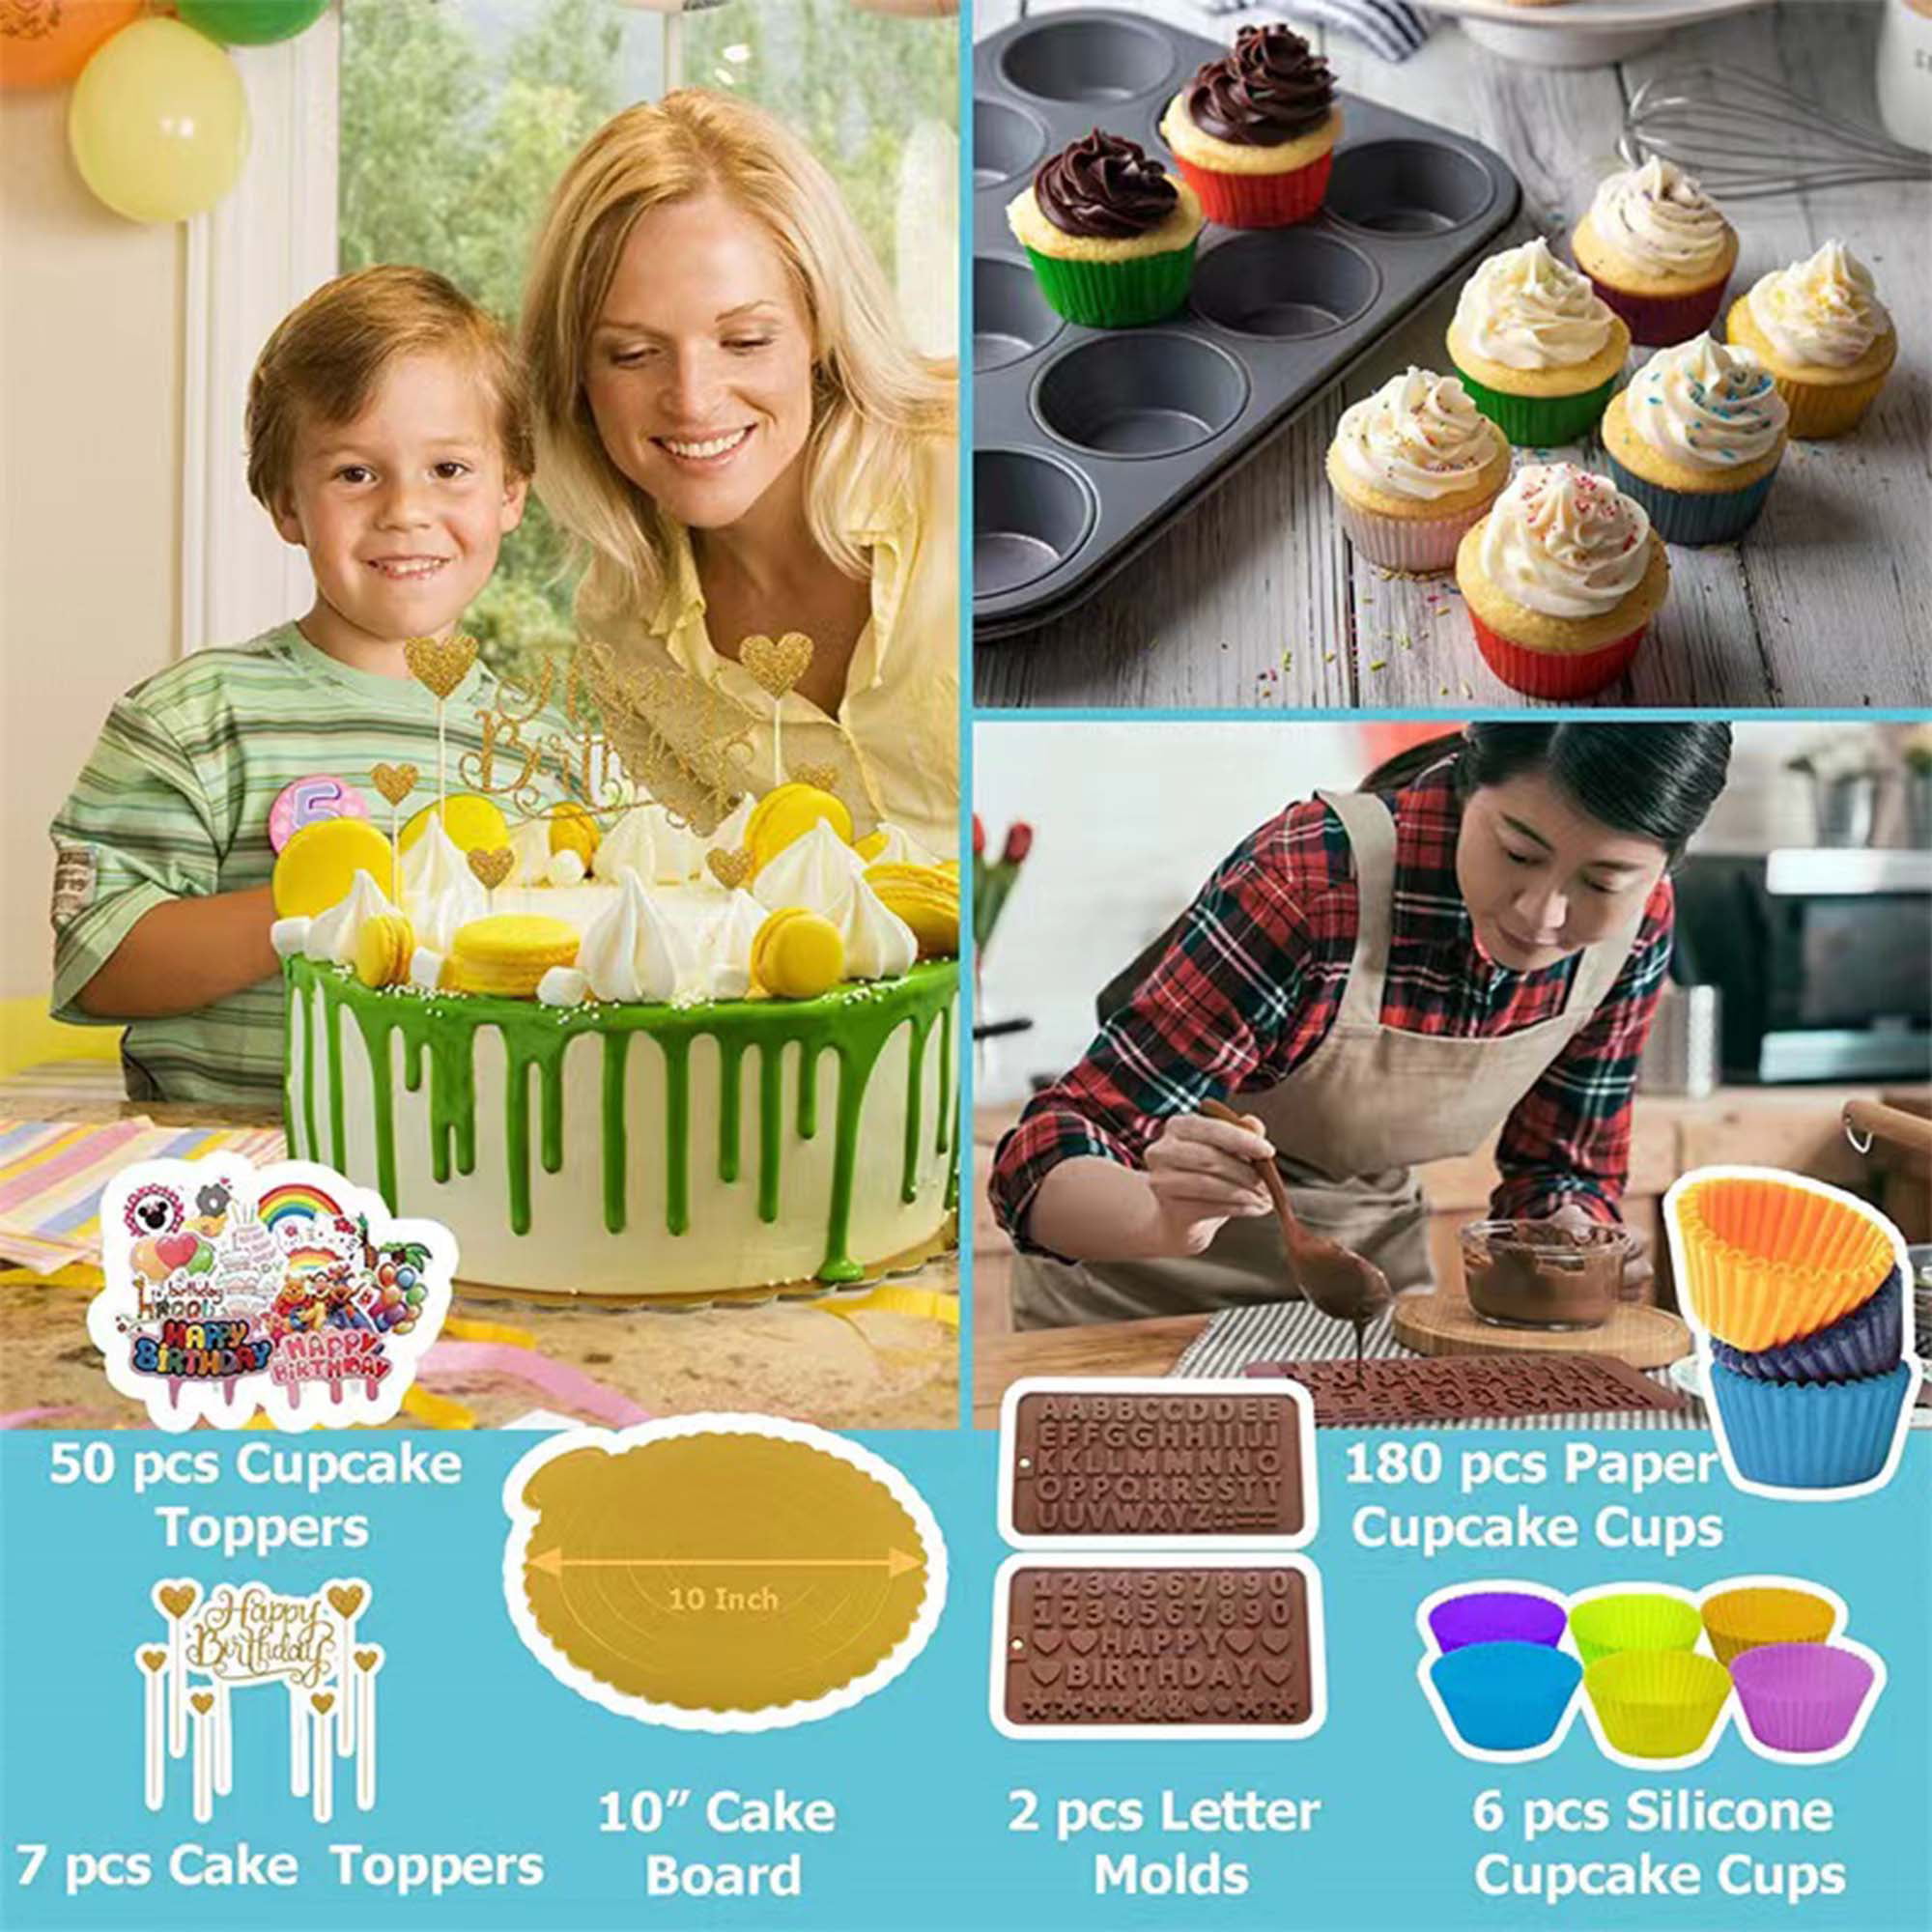 Suuker 137 Pcs Cake Decorating Supplies Kit, Icing Piping Tips and Piping Bags with Pattern Chart, Baking Accessories with Cake Turntable and